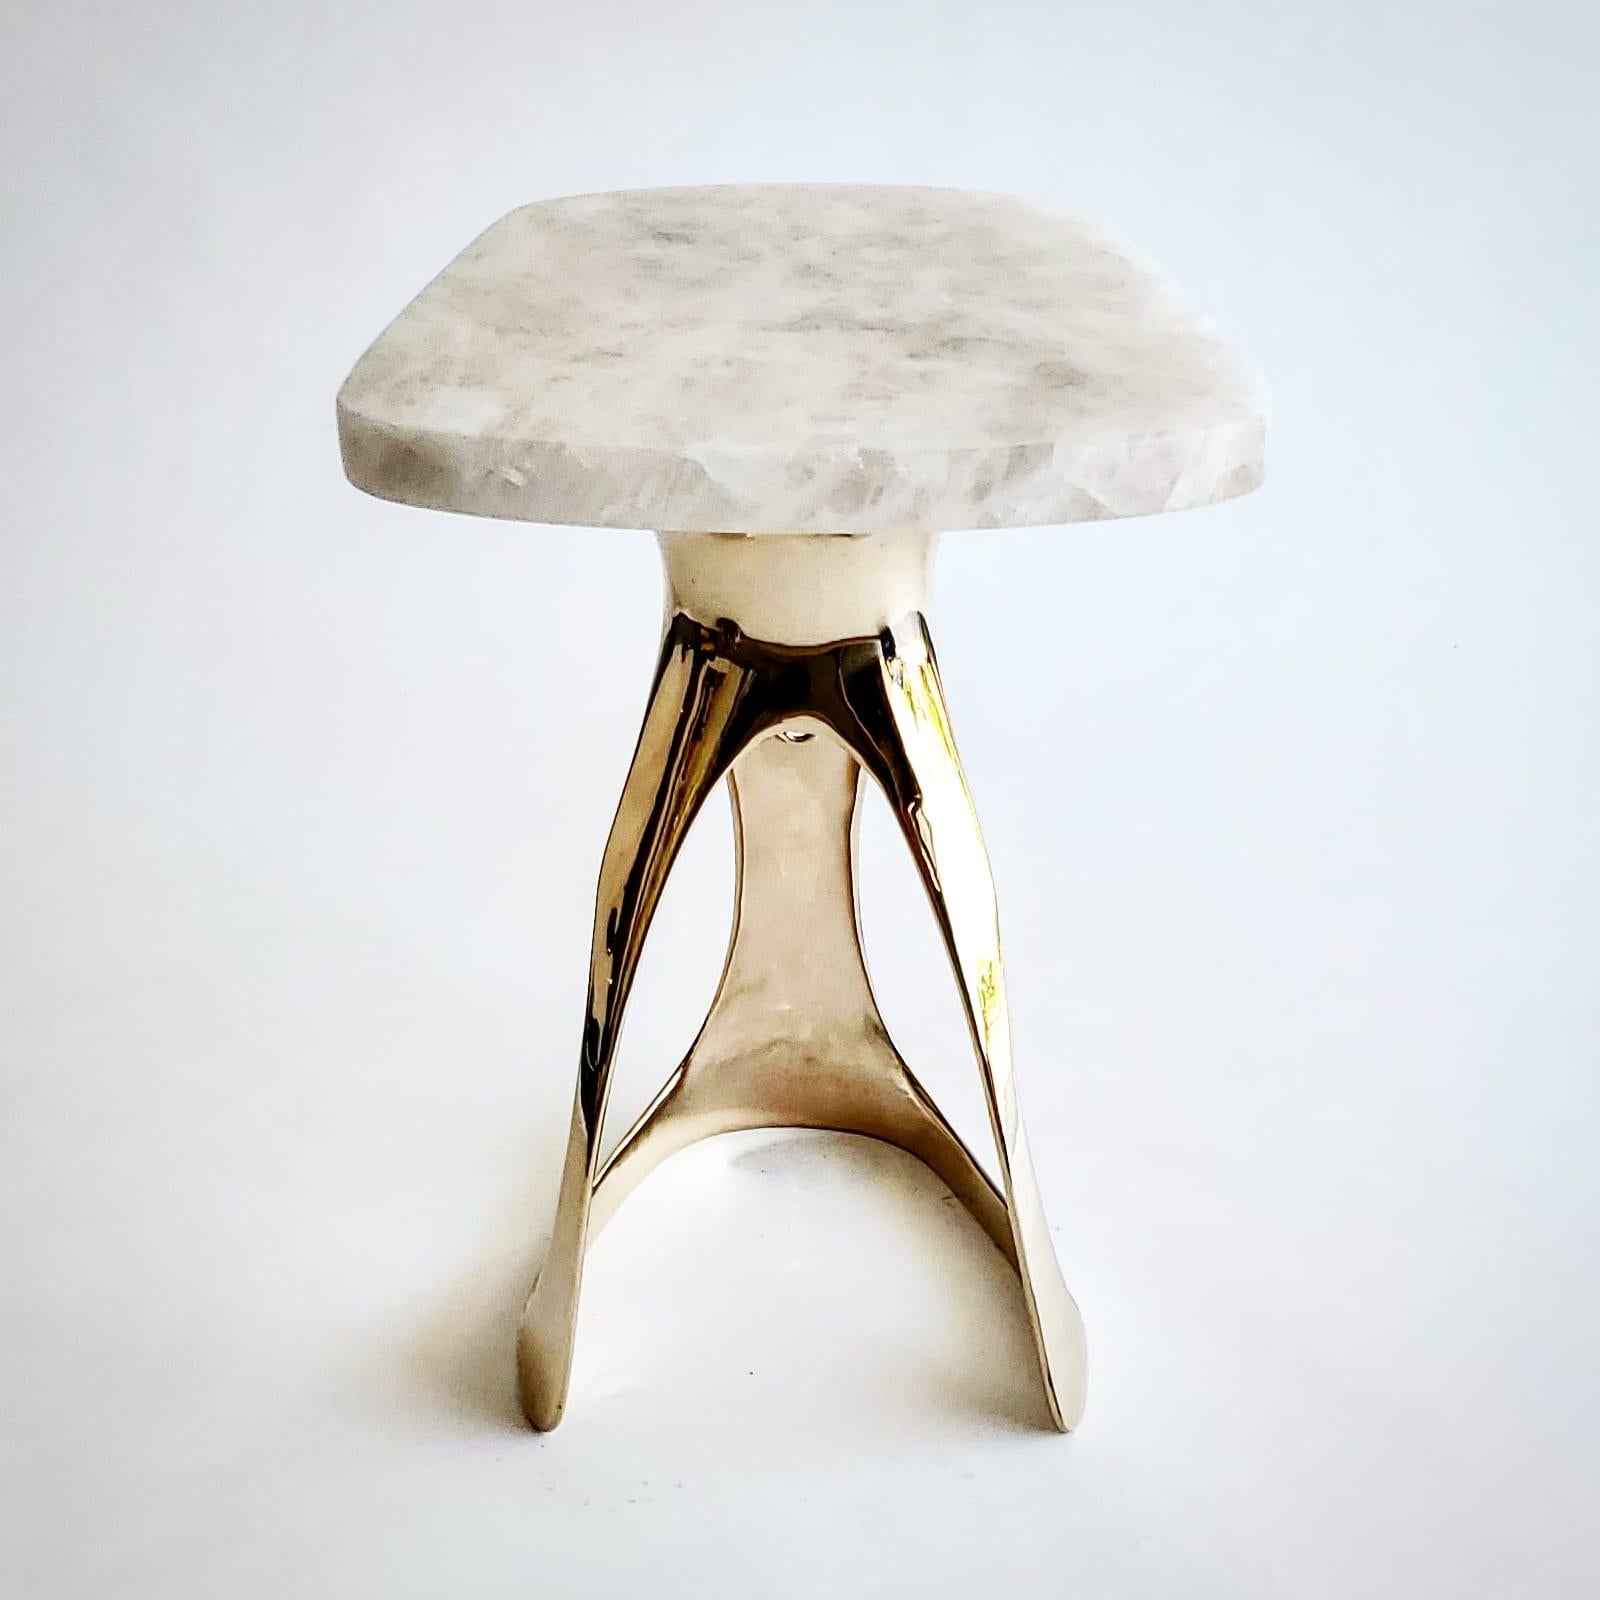 Machine-Made Pyra Table - Polished Bronze and Quartzite Top Design by Michael Sean Stolworthy For Sale